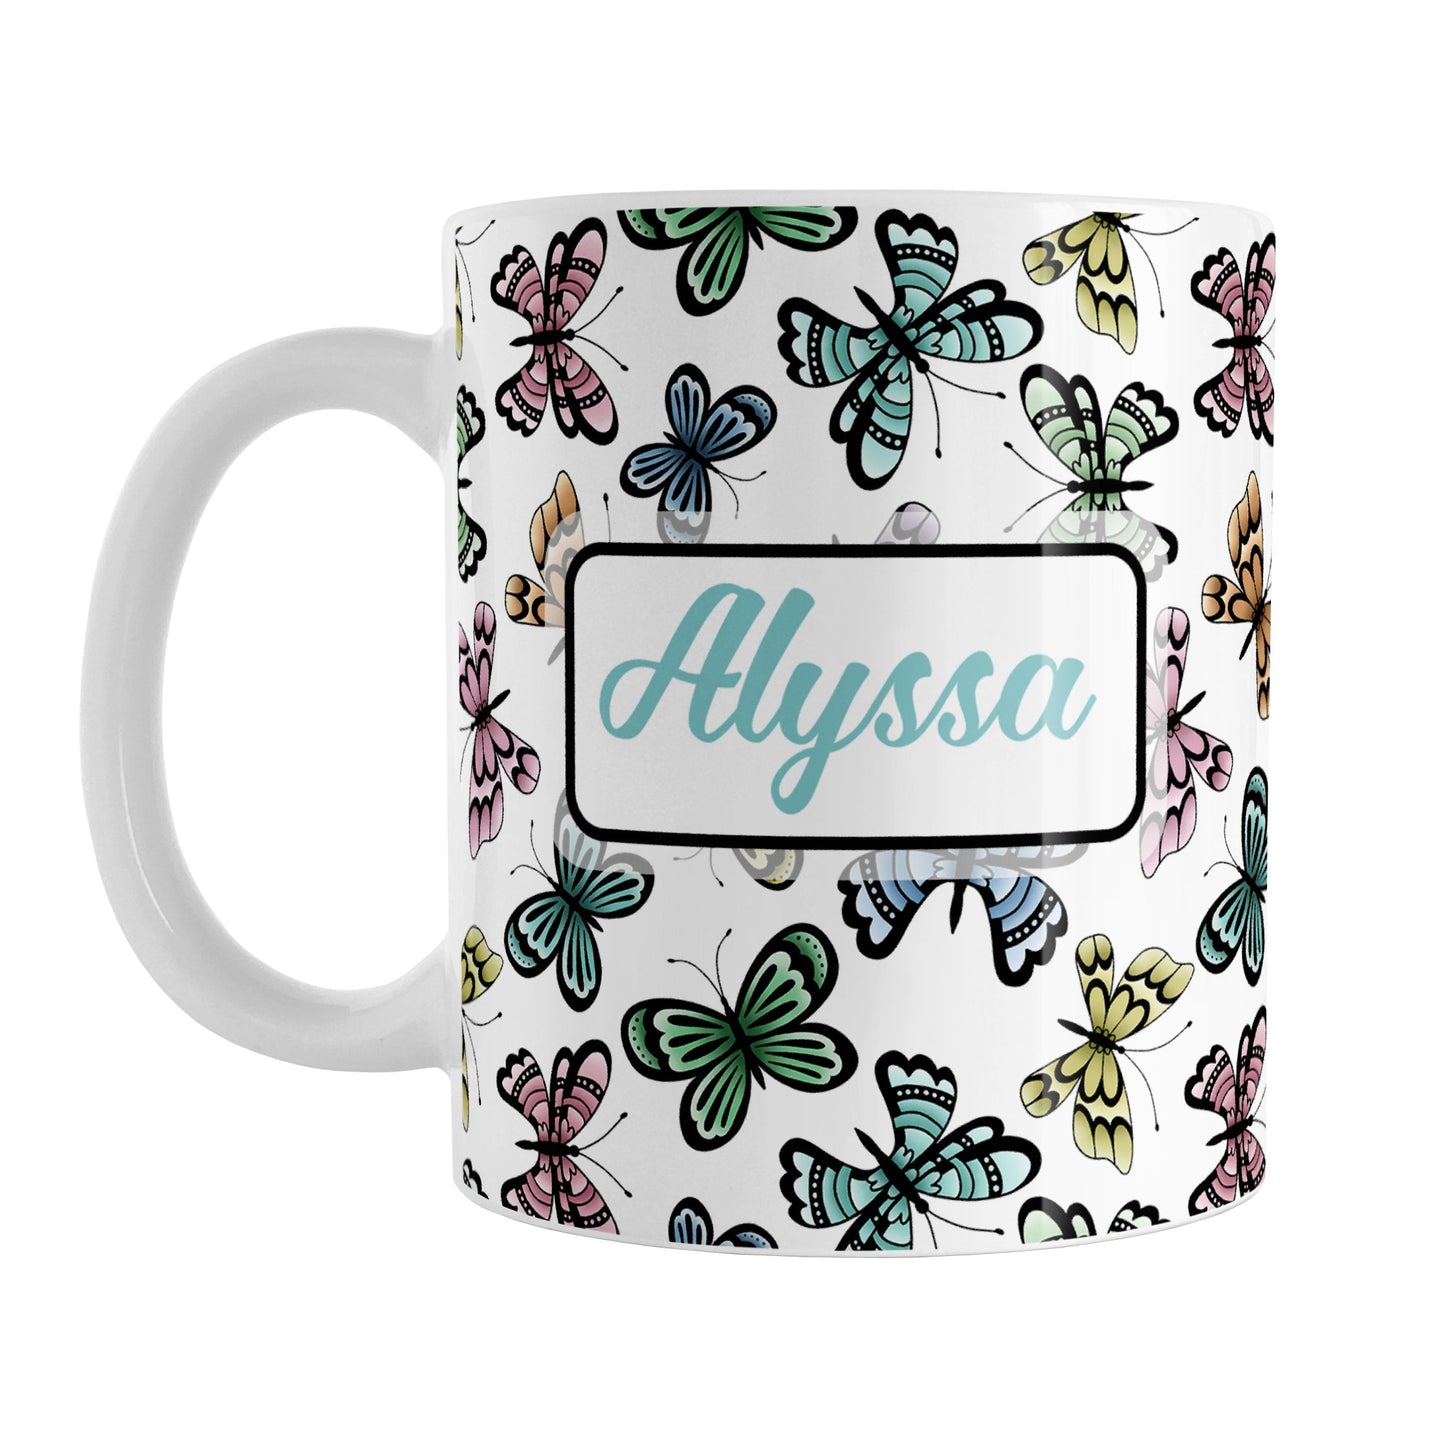 Personalized Pretty Butterfly Pattern Mug (11oz) at Amy's Coffee Mugs. A ceramic coffee mug designed with pretty and colorful butterflies in a pattern that wraps around the mug to the handle. Your name is personalized in turquoise on both sides of the mug. 